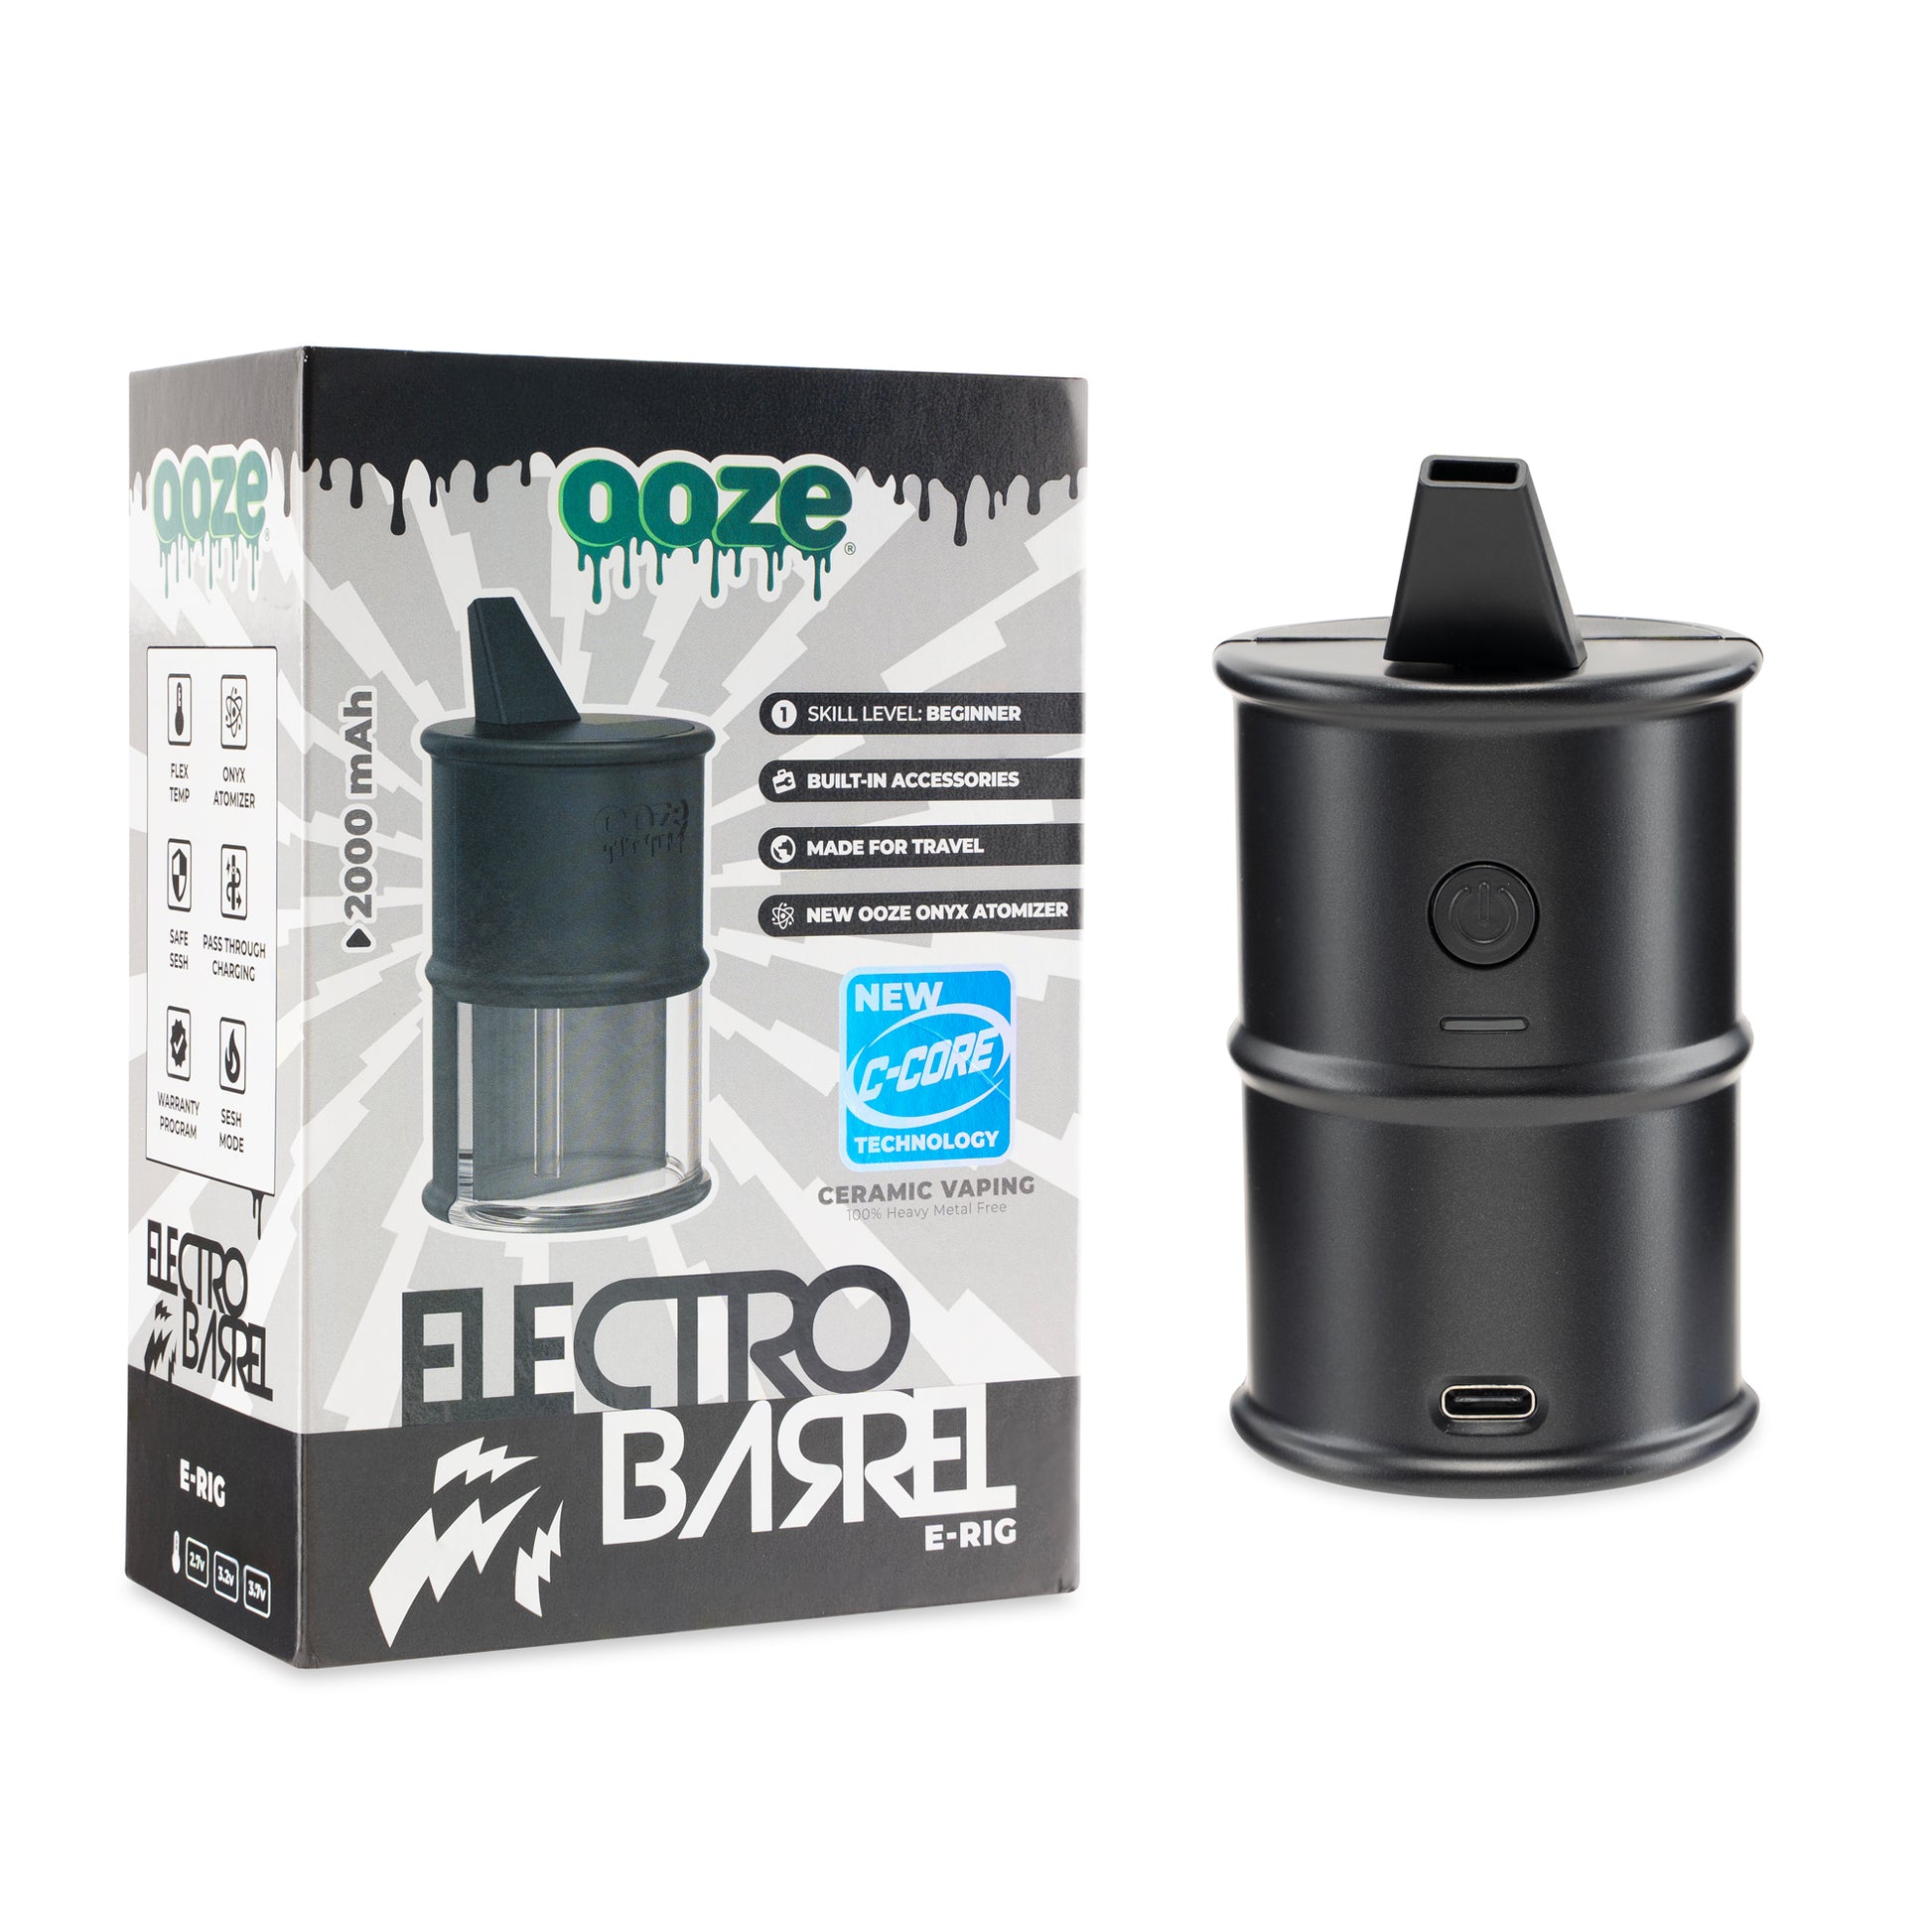 The Panther Black Ooze Electro Barrel E-Rig is shown next to its packaging.